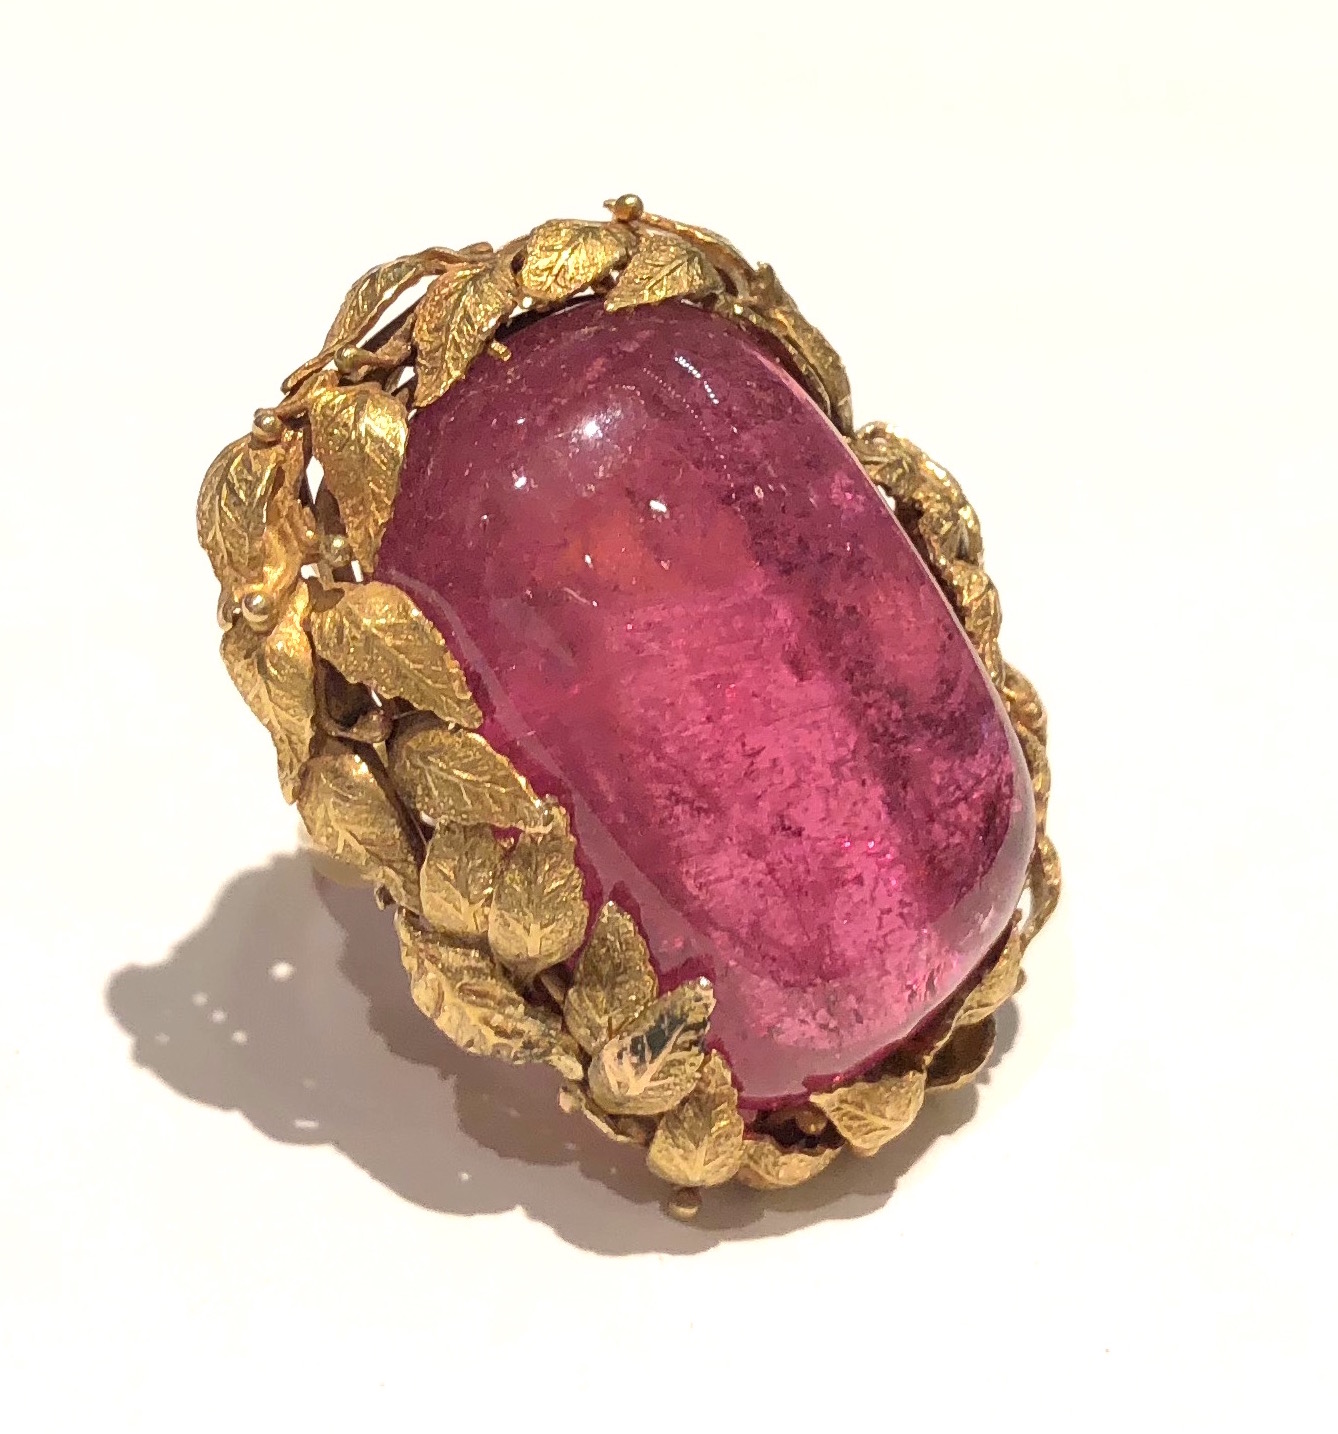 American Arts & Crafts ring (most likely Boston School) set with a large rectangular shaped pink tourmaline cabochon (approx. 54 carats) set in an elaborate 18k gold handwrought mounting with a garland surround of leaves and scrolling structural ring shank support, c. 1915